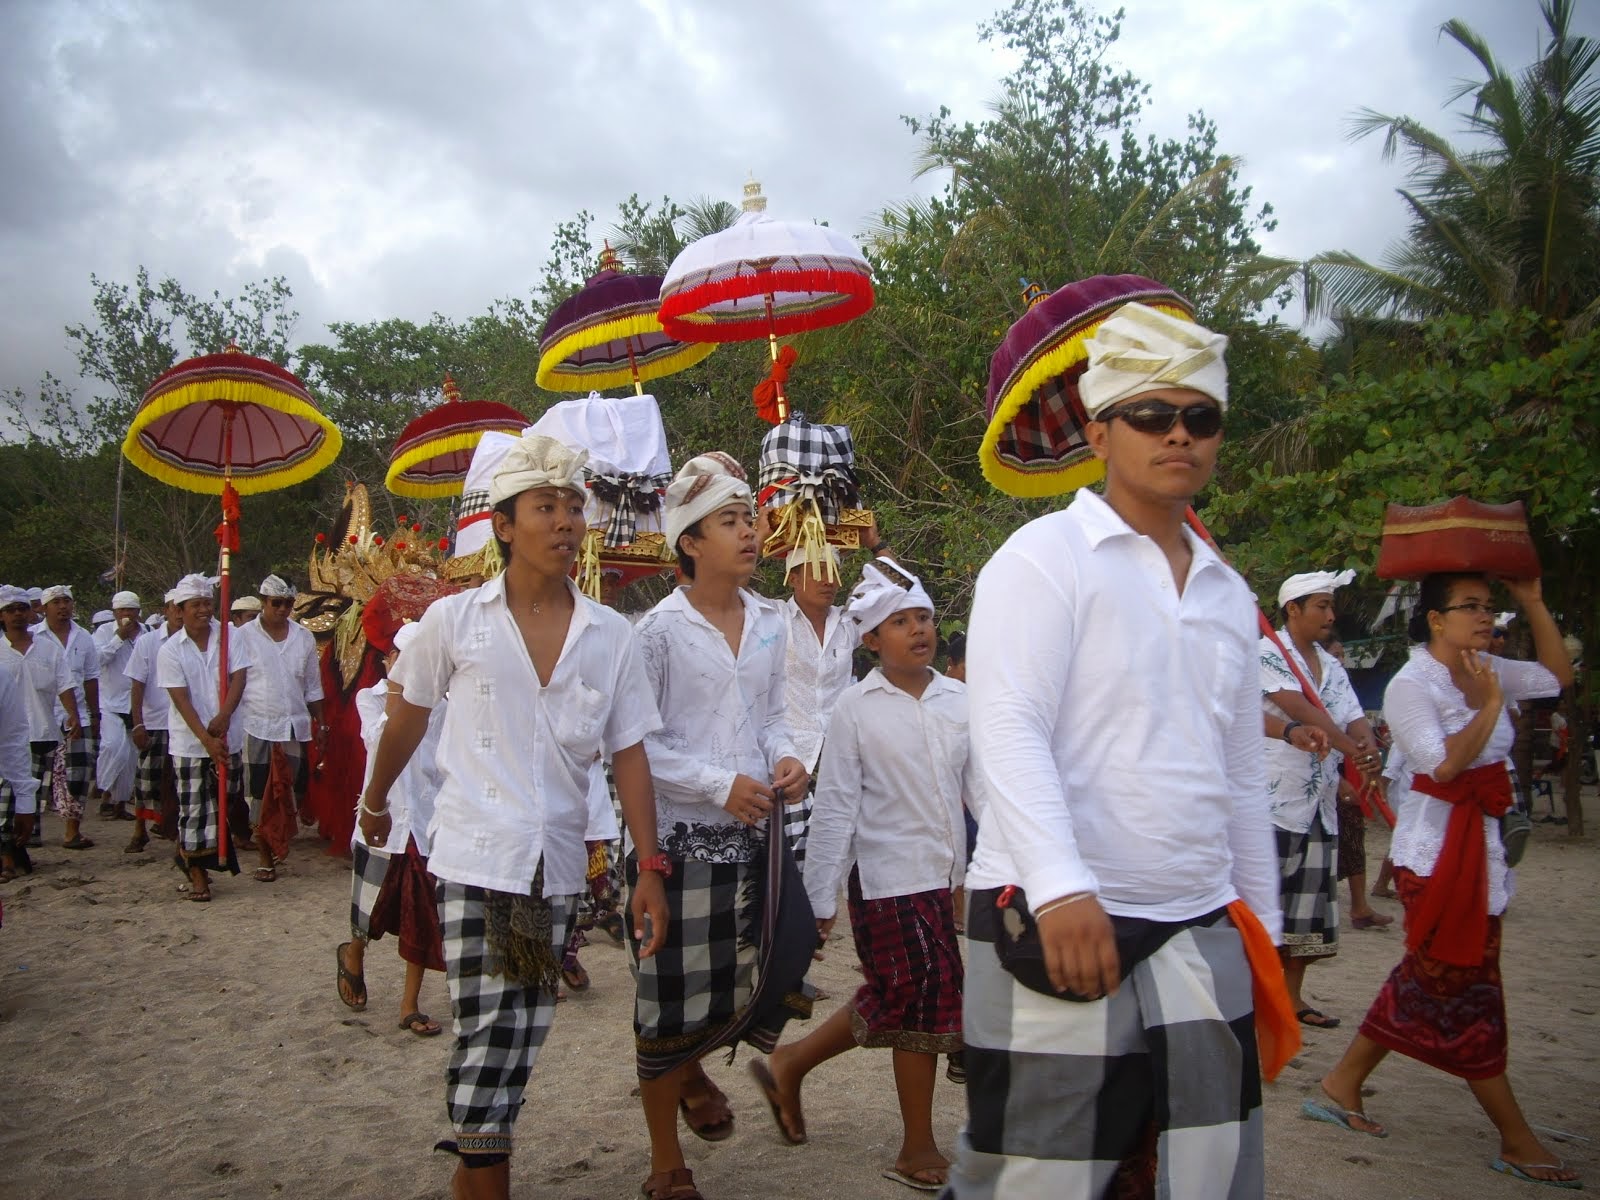 RELIGIOUS CEREMONIAL PROCESSION ON KUTA BEACH--A SPECTACULAR SIGHT